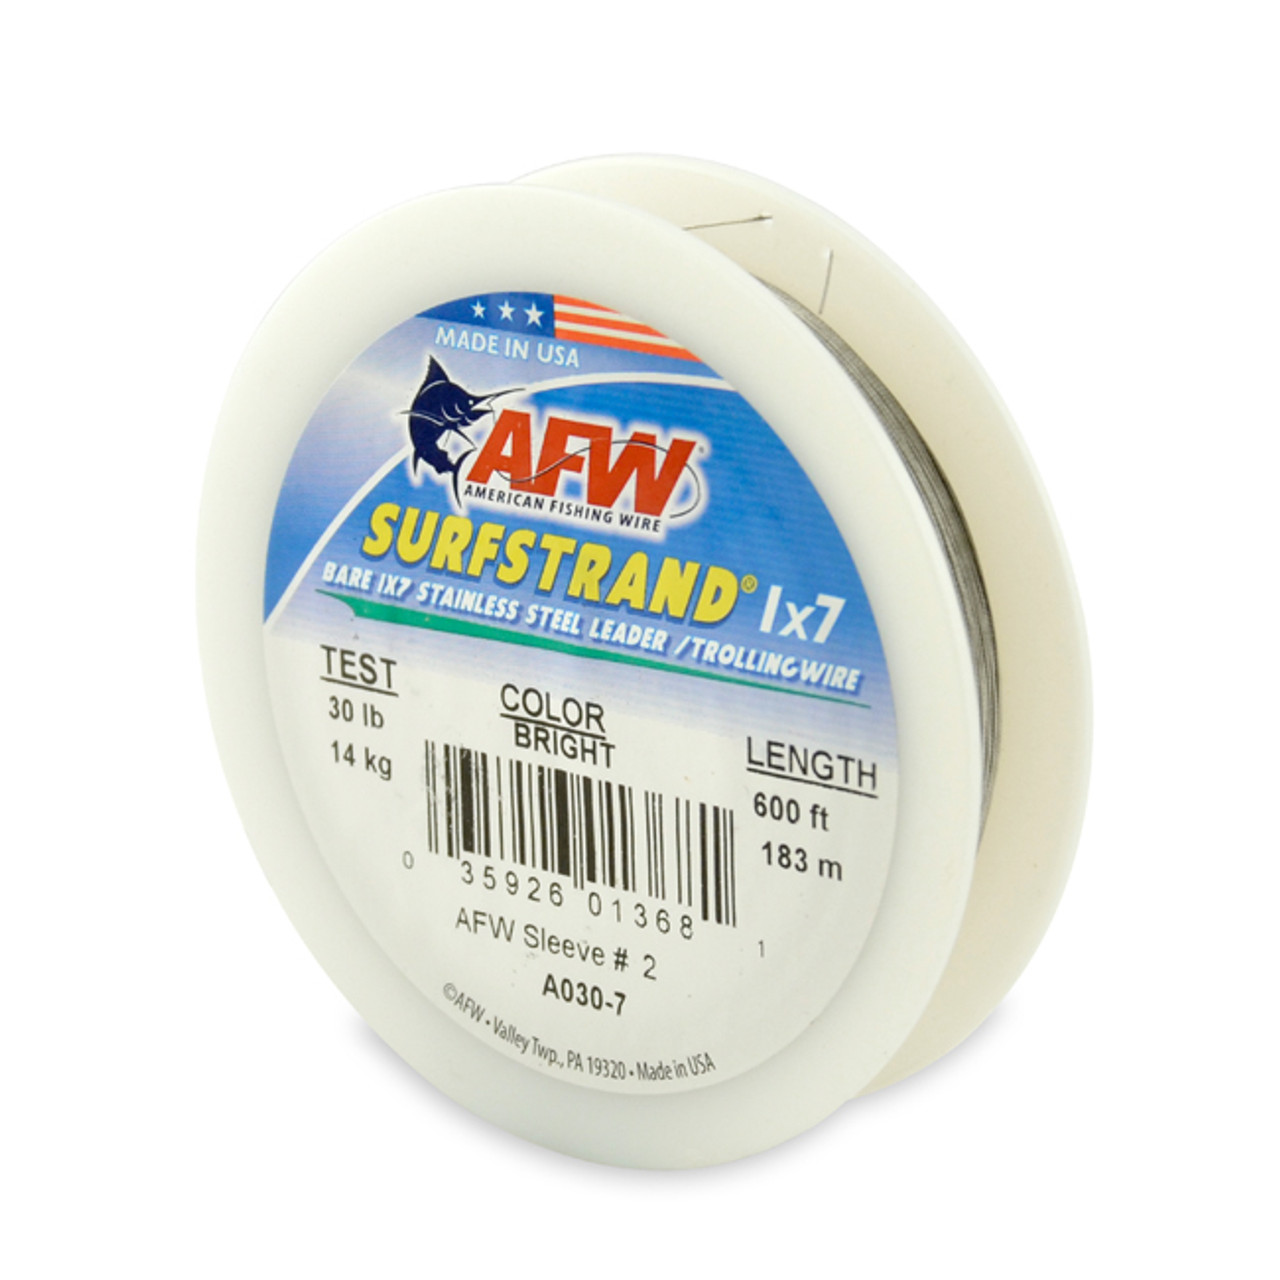 AFW - Surfstrand Bare 1x7 Stainless Steel Leader Wire - Bright - 600 Feet 